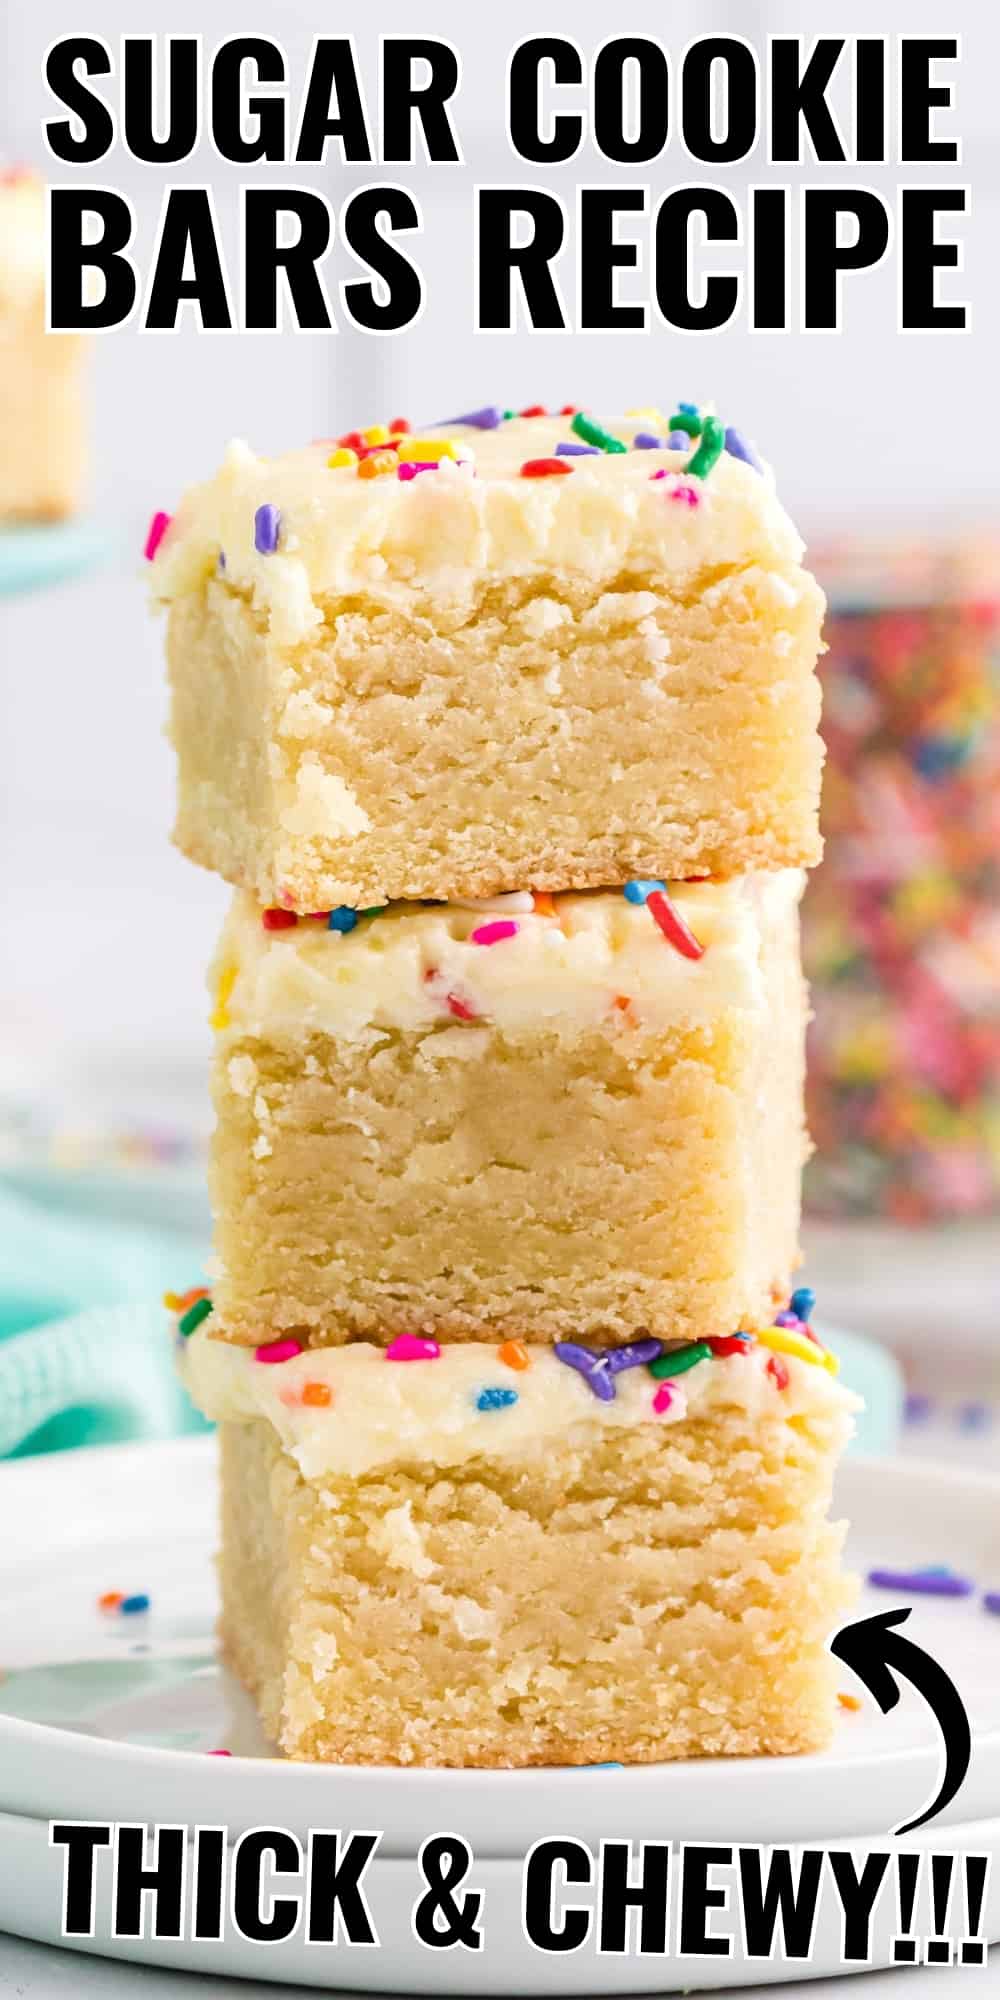 3 thick sugar cookie bars with frosting stacked on a white plate. Reads: Sugar cookie bars recipe, thick and chewy